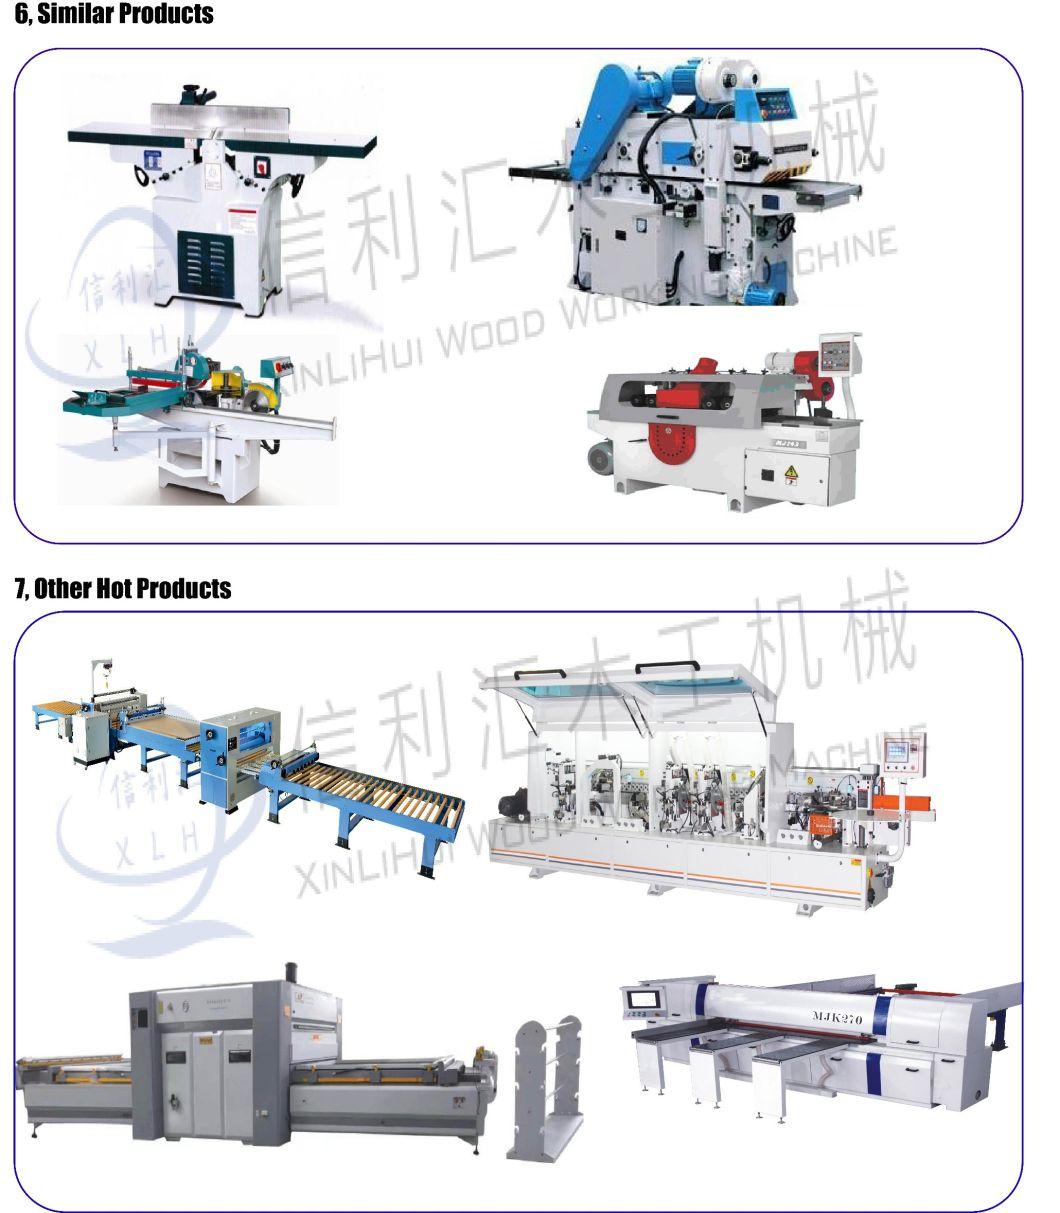 The Tracked Wood Plate Multi Rip Saw Multiple Blade Circular Saw with Competitive Price for Small Cypress Logs Mainly Into Boards for Flooring